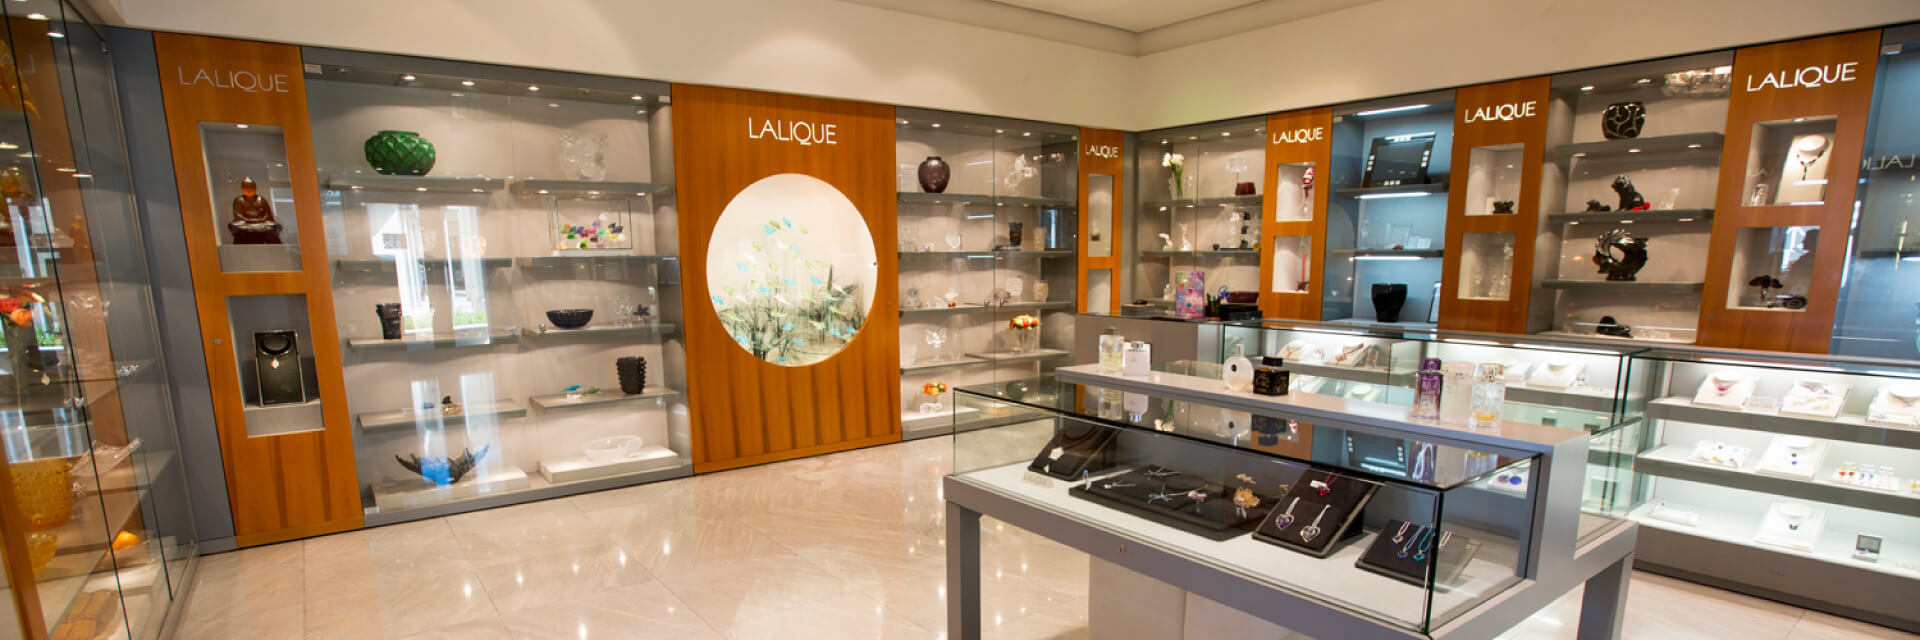 Lalique store interior in the Cayman Islands